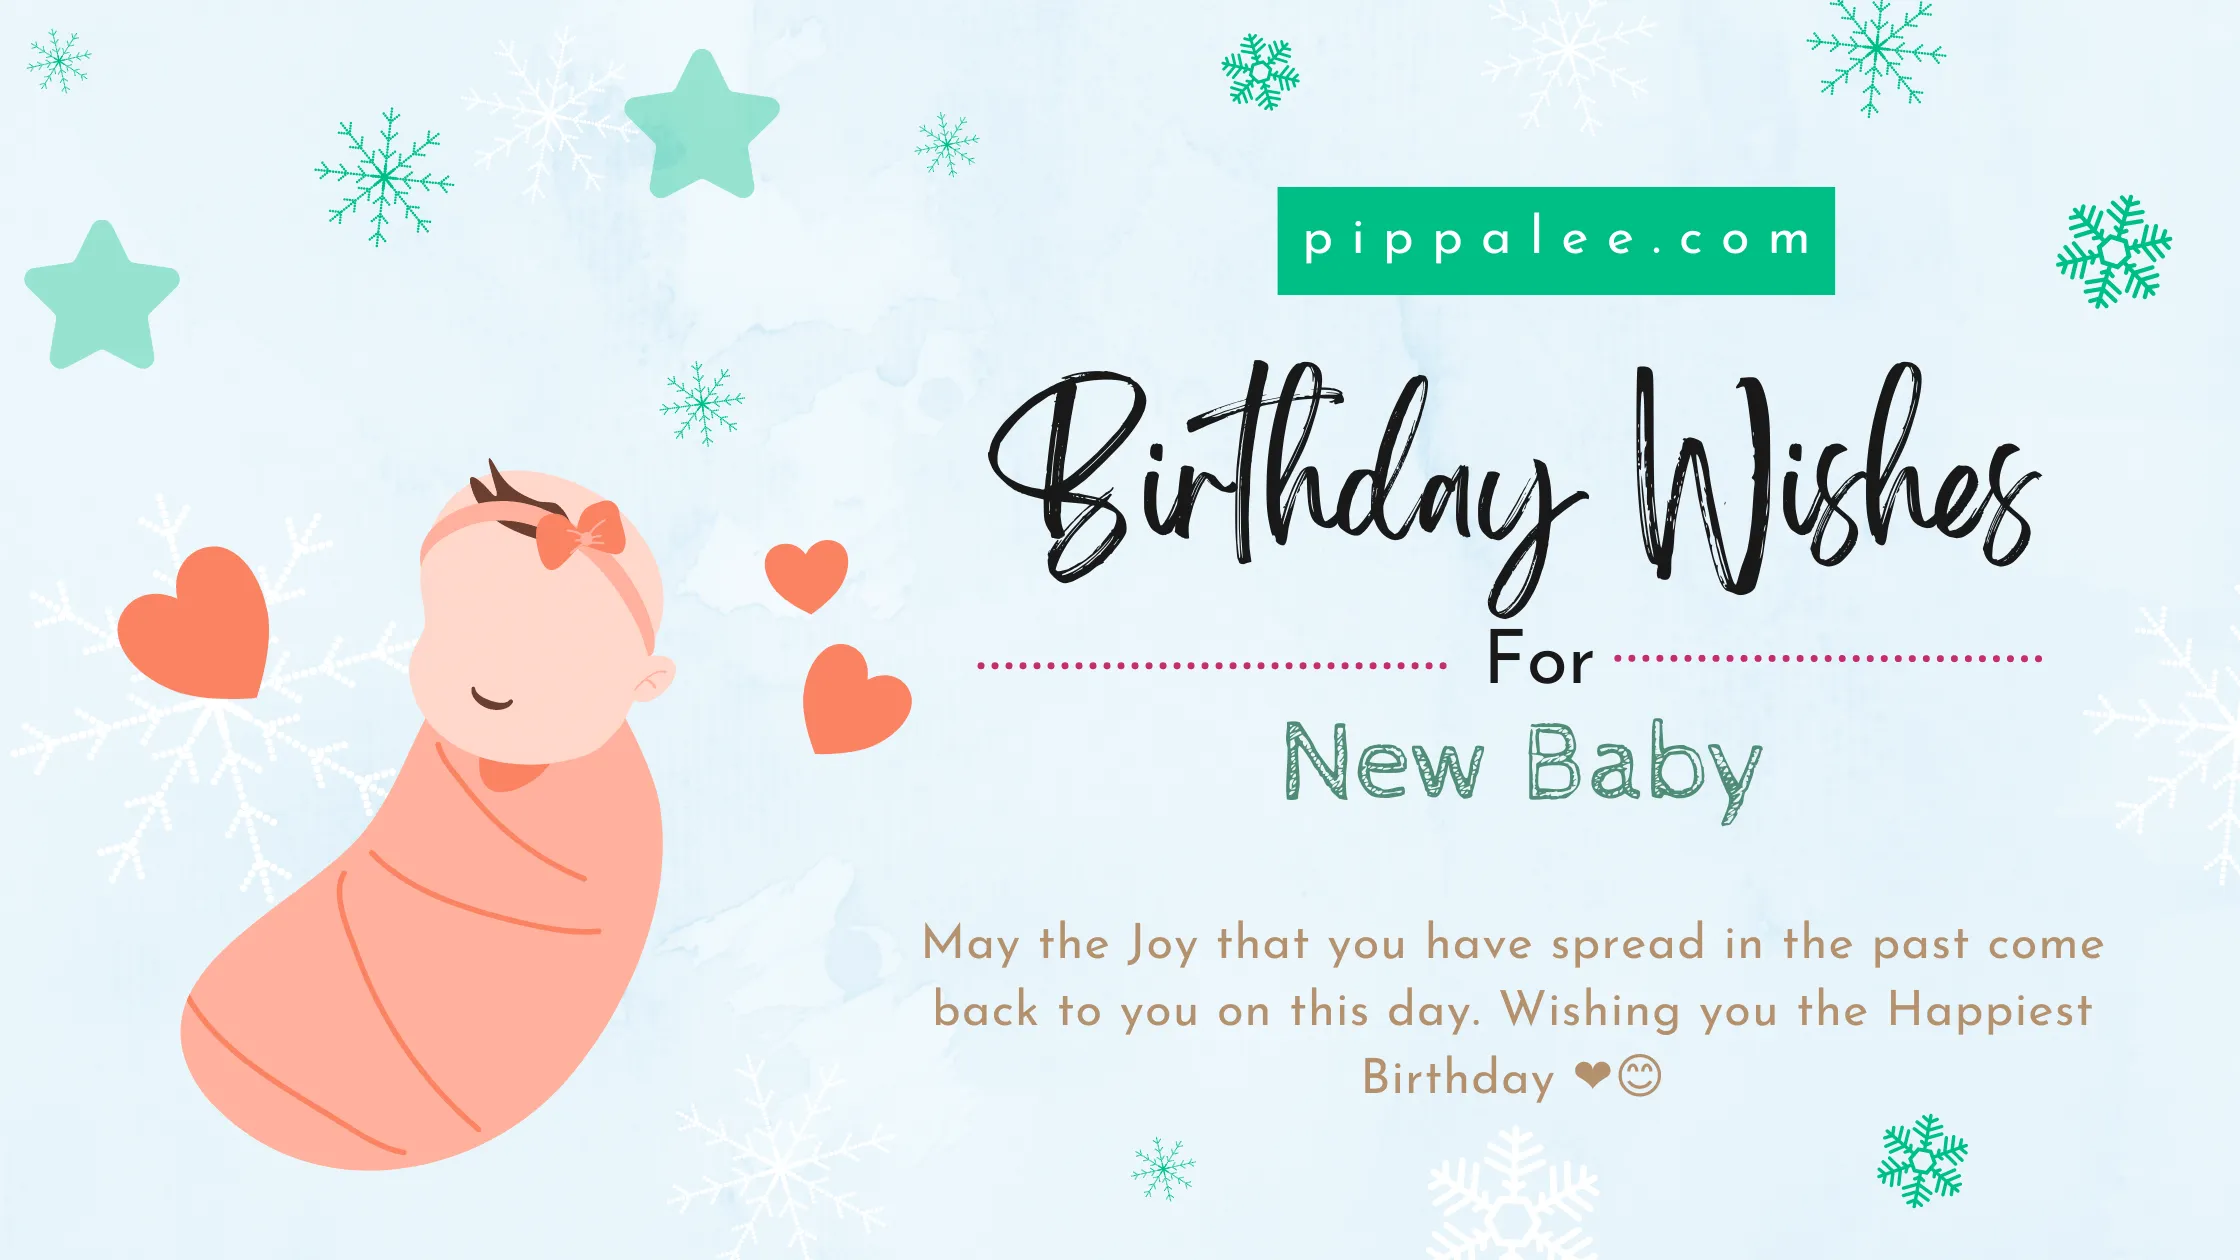 Birthday Wishes For New Baby - Wishes & Messages